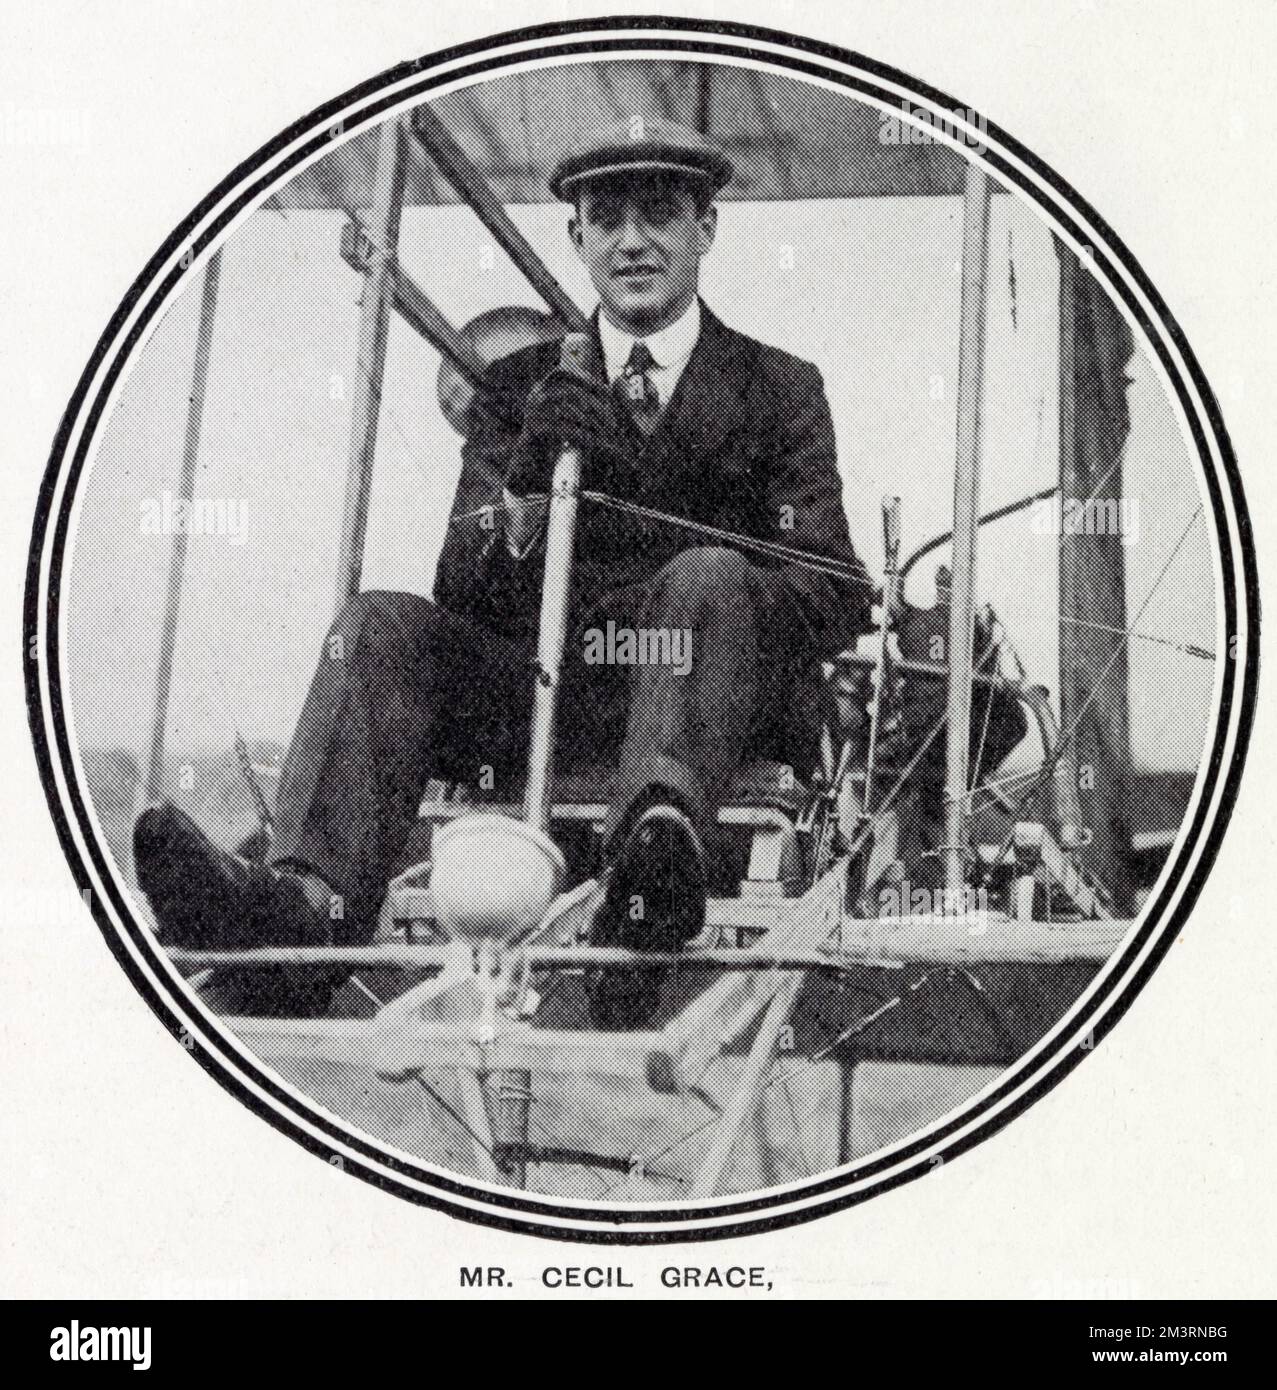 Cecil Stanley Grace (1880 - 1910), pioneer aviator who went missing on a flight return trip in the English Channel, to win Baron de Forest's price of £4,000.      Date: 1910 Stock Photo